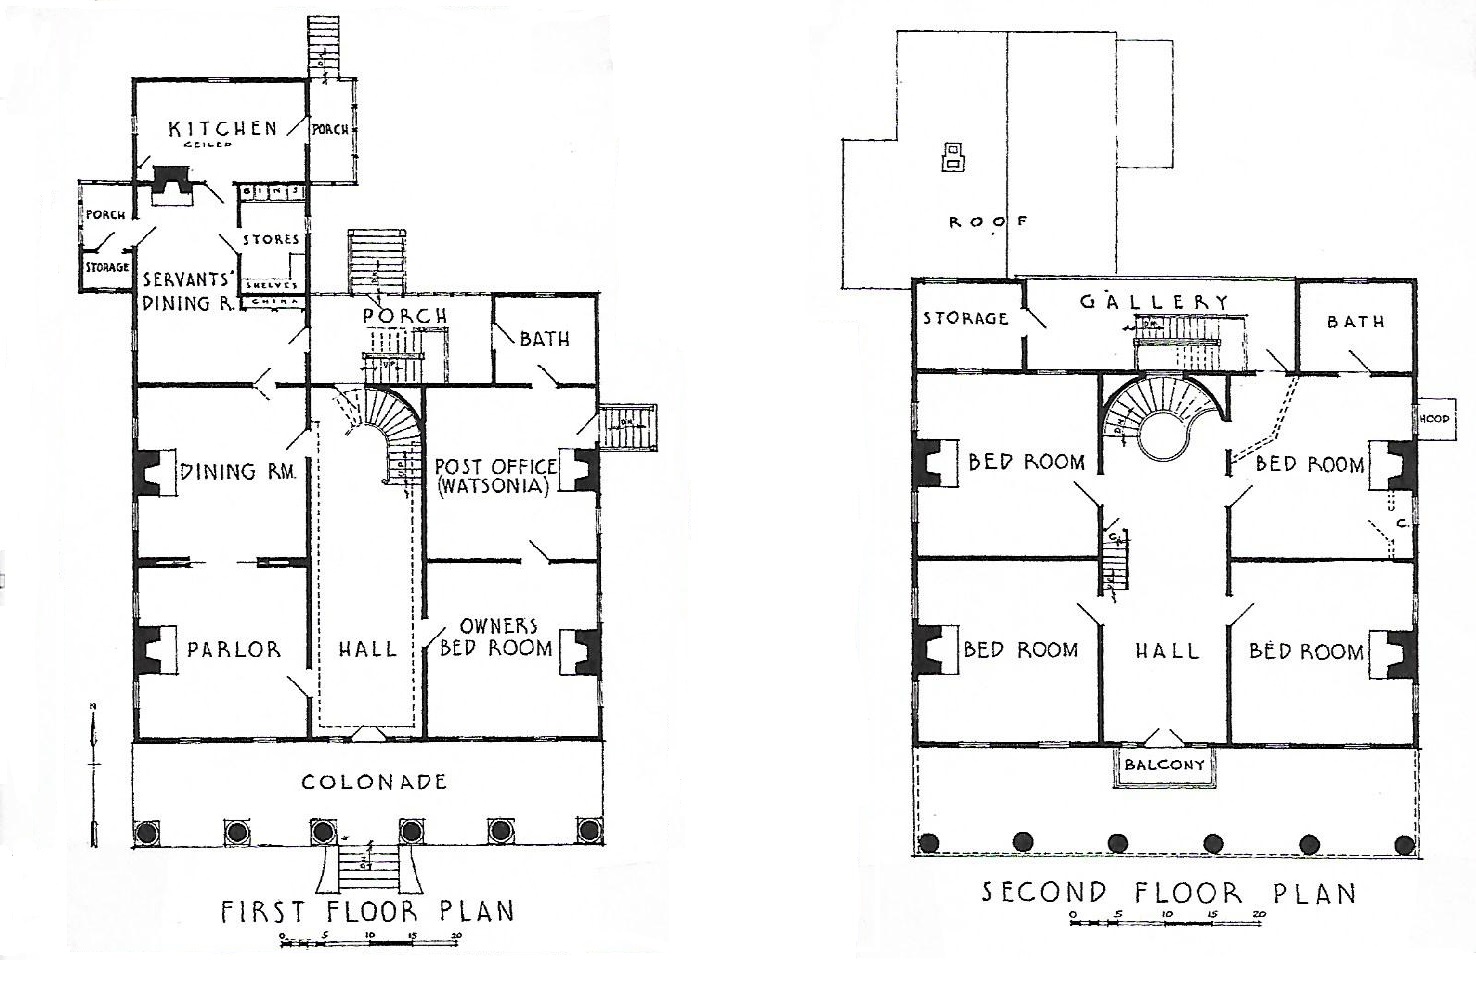 Photo of the interior plans